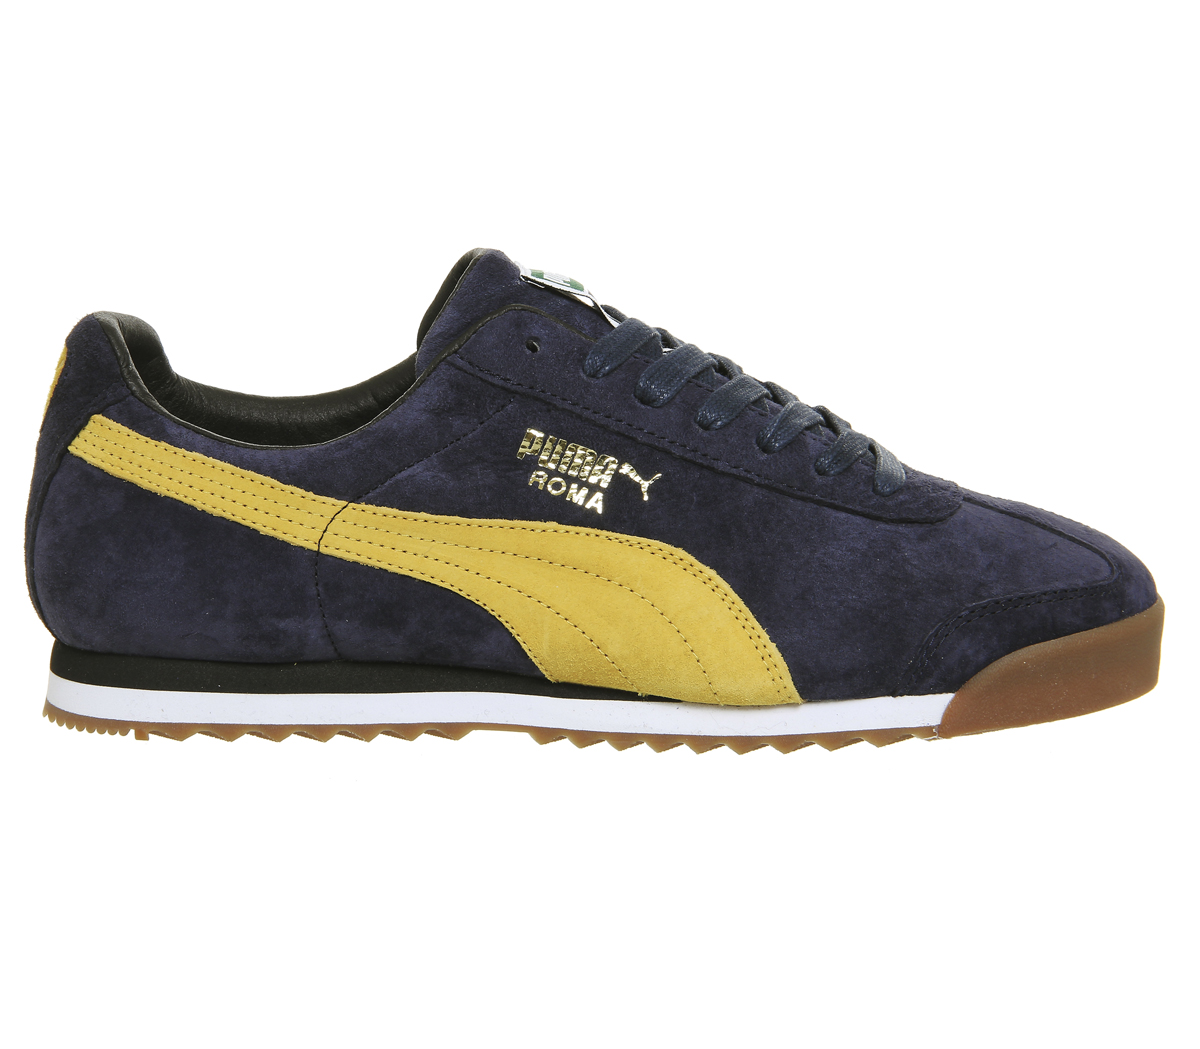 Puma Roma Navy Yellow Suede Exclusive - His trainers